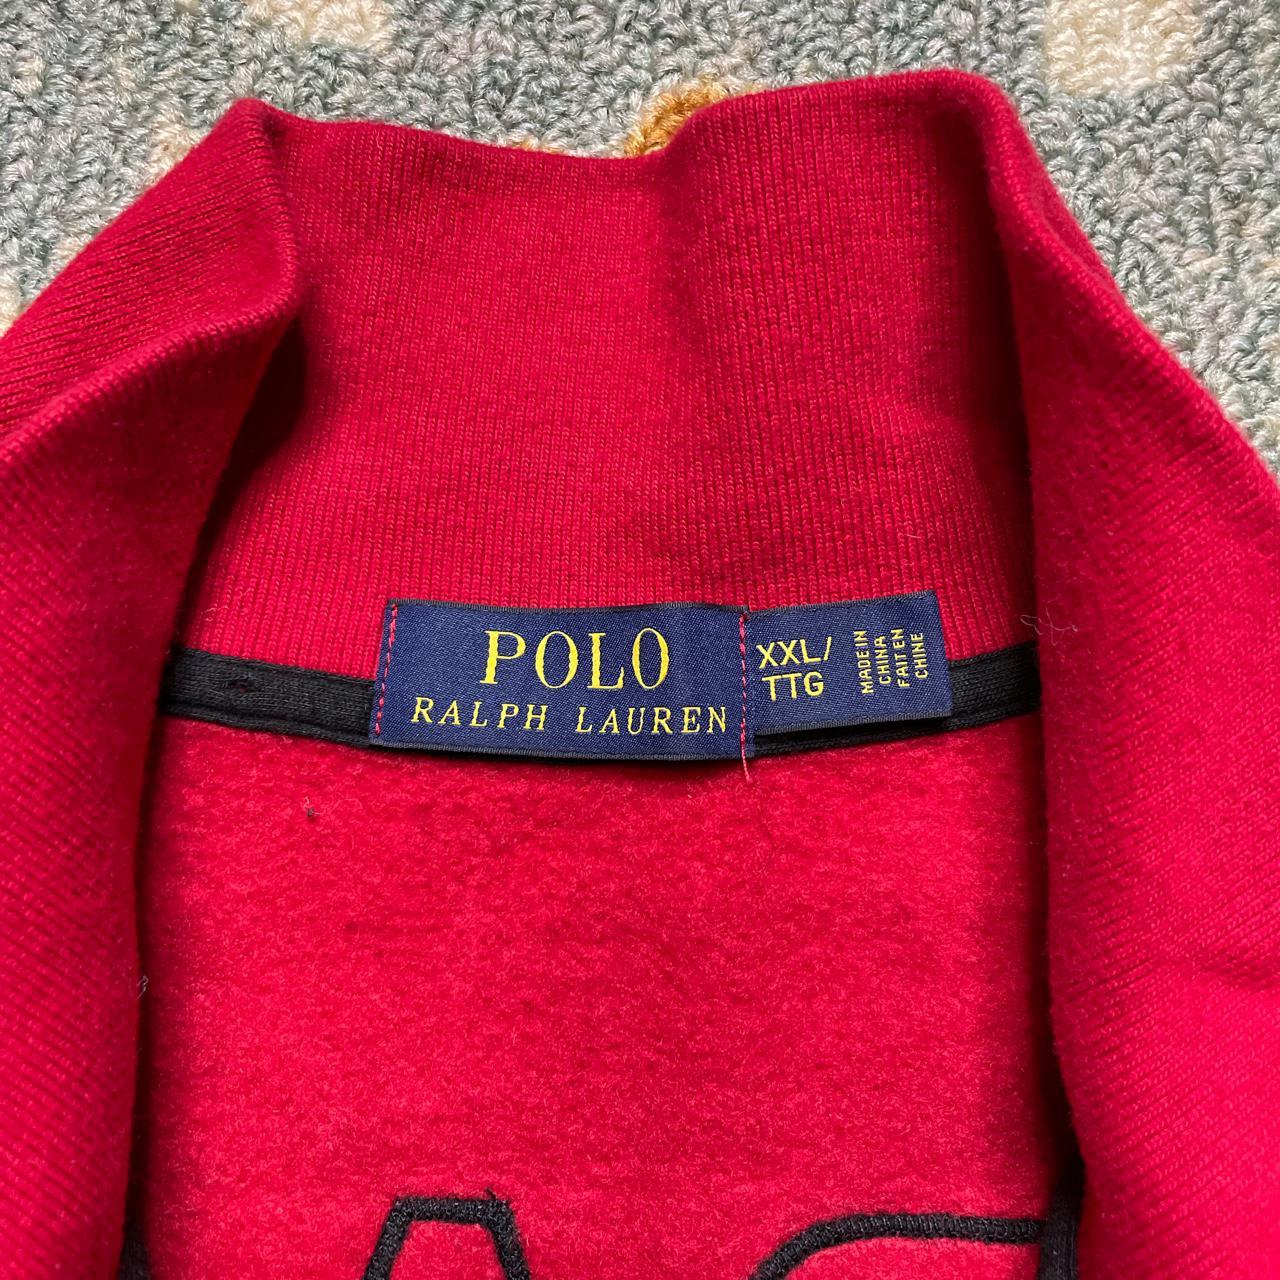 Polo Ralph Lauren Spain track and field black red... - Depop